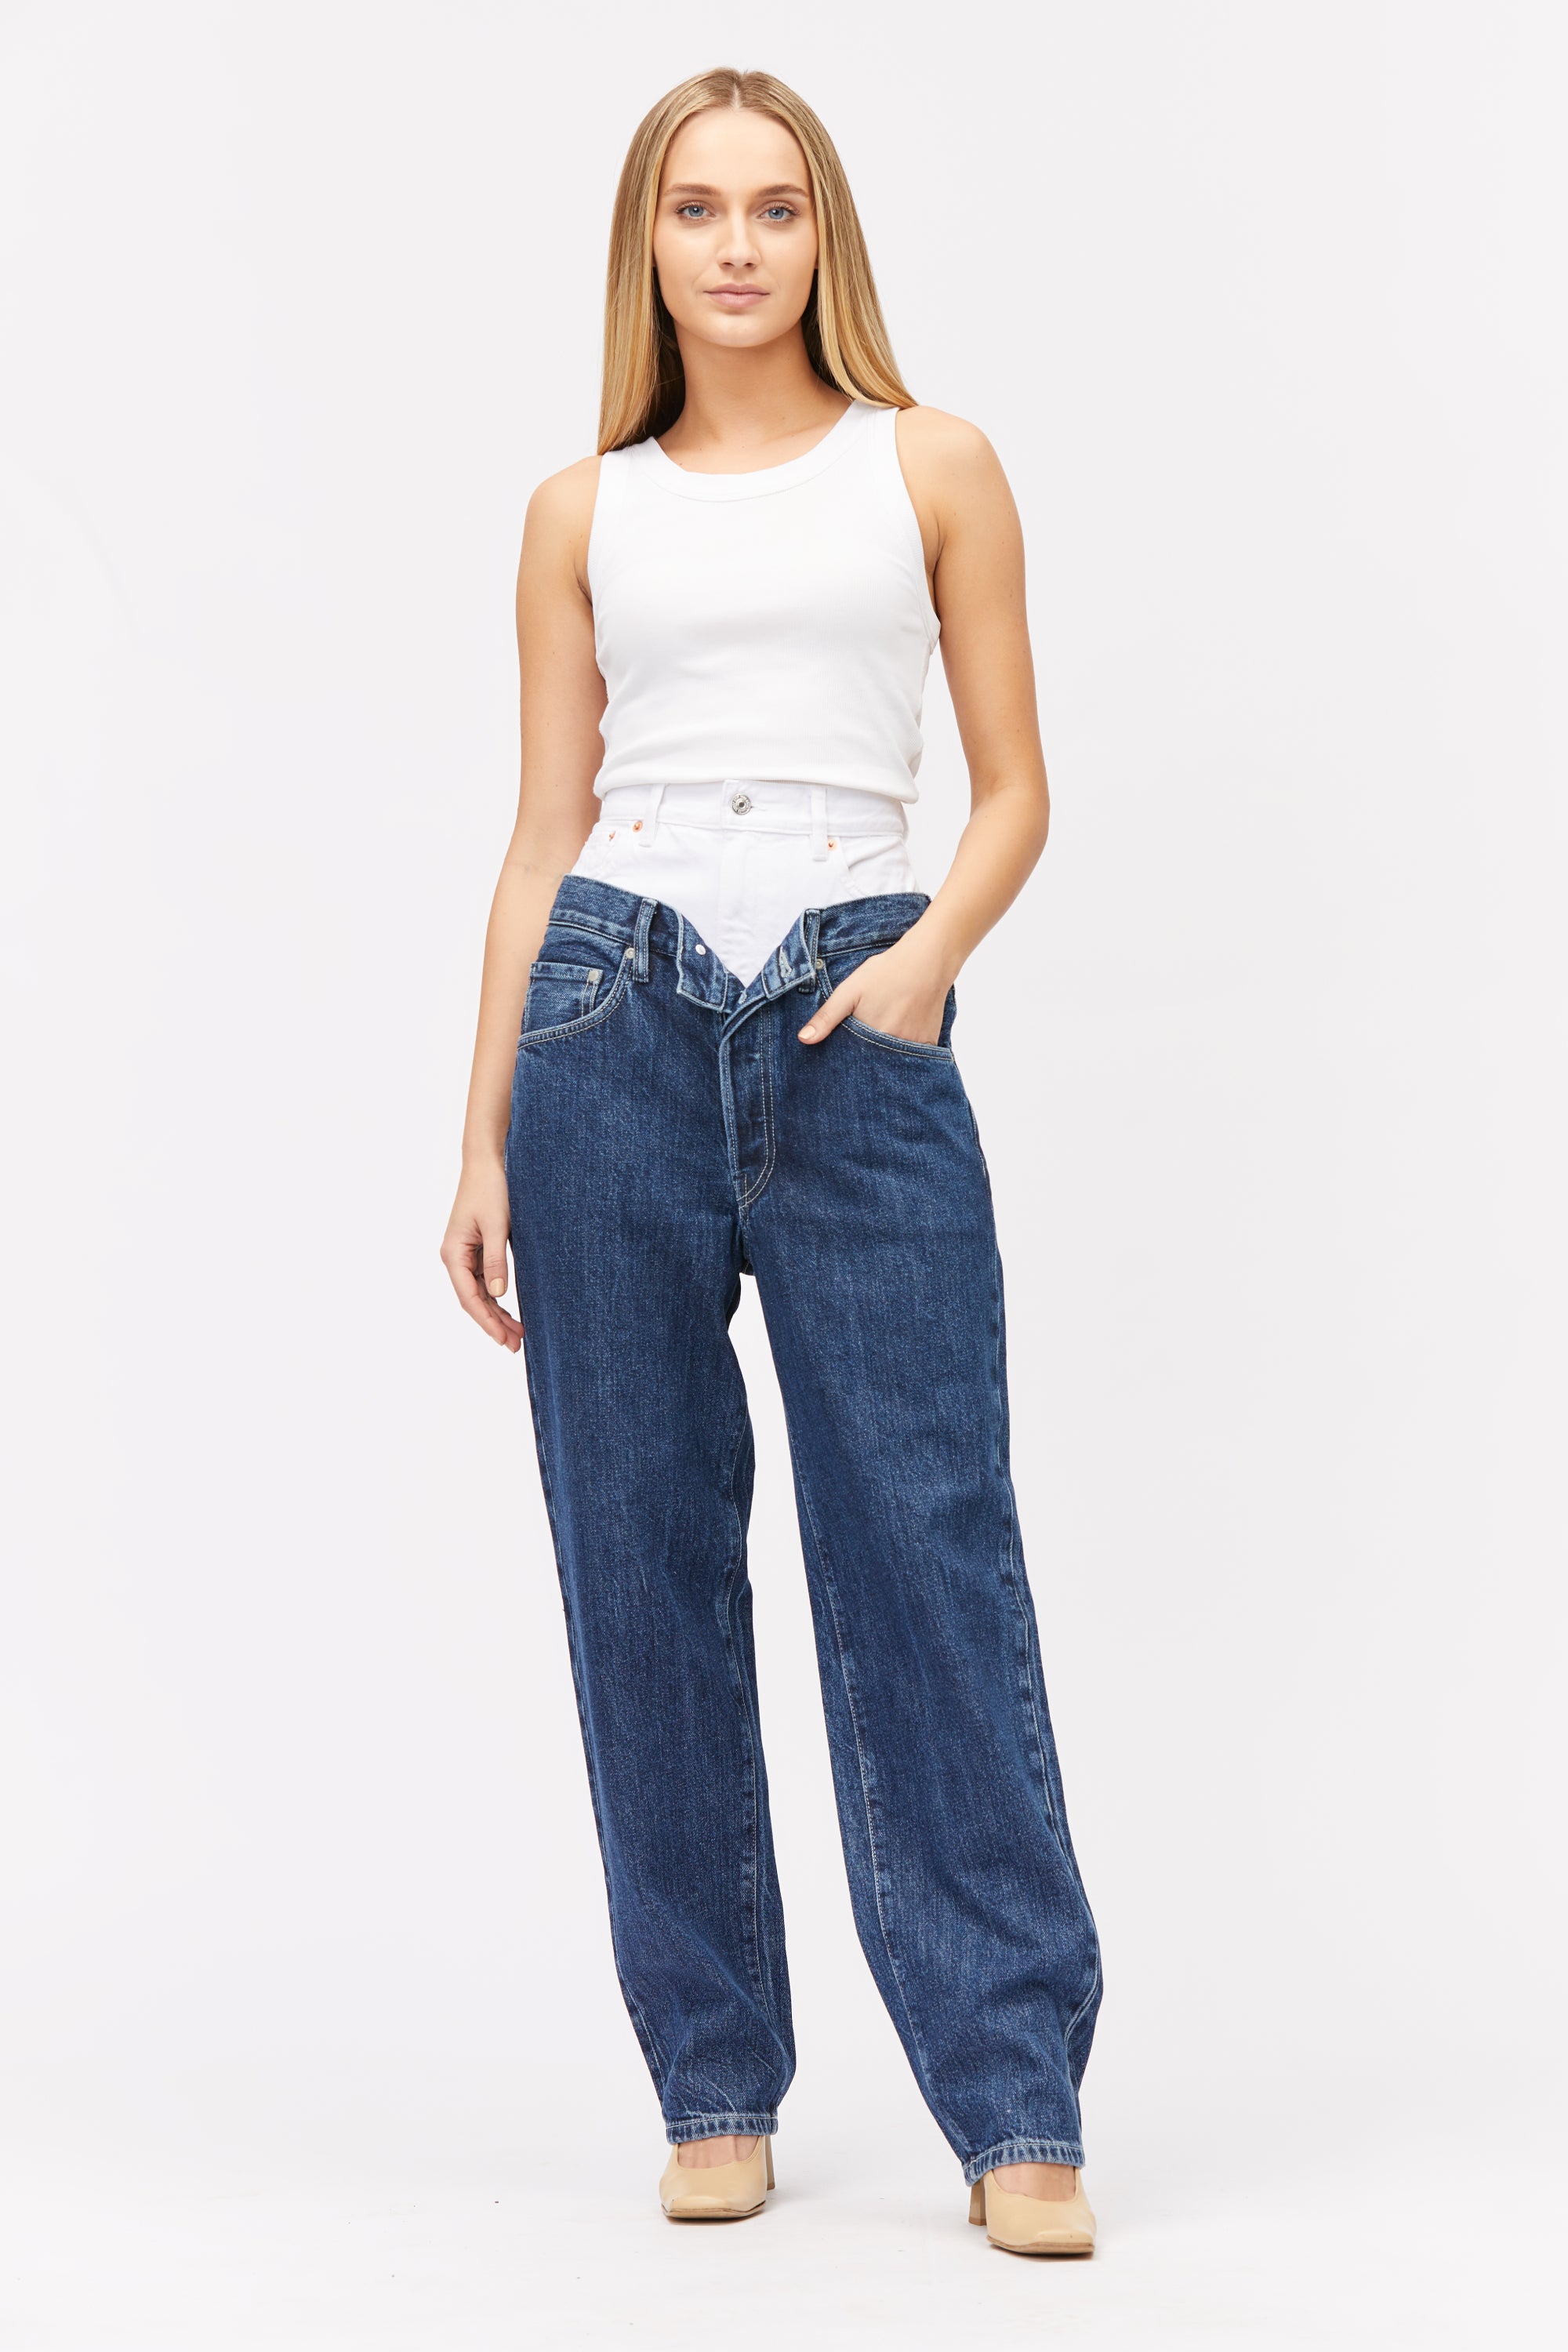 2IN1JEANS - SIZE S-M